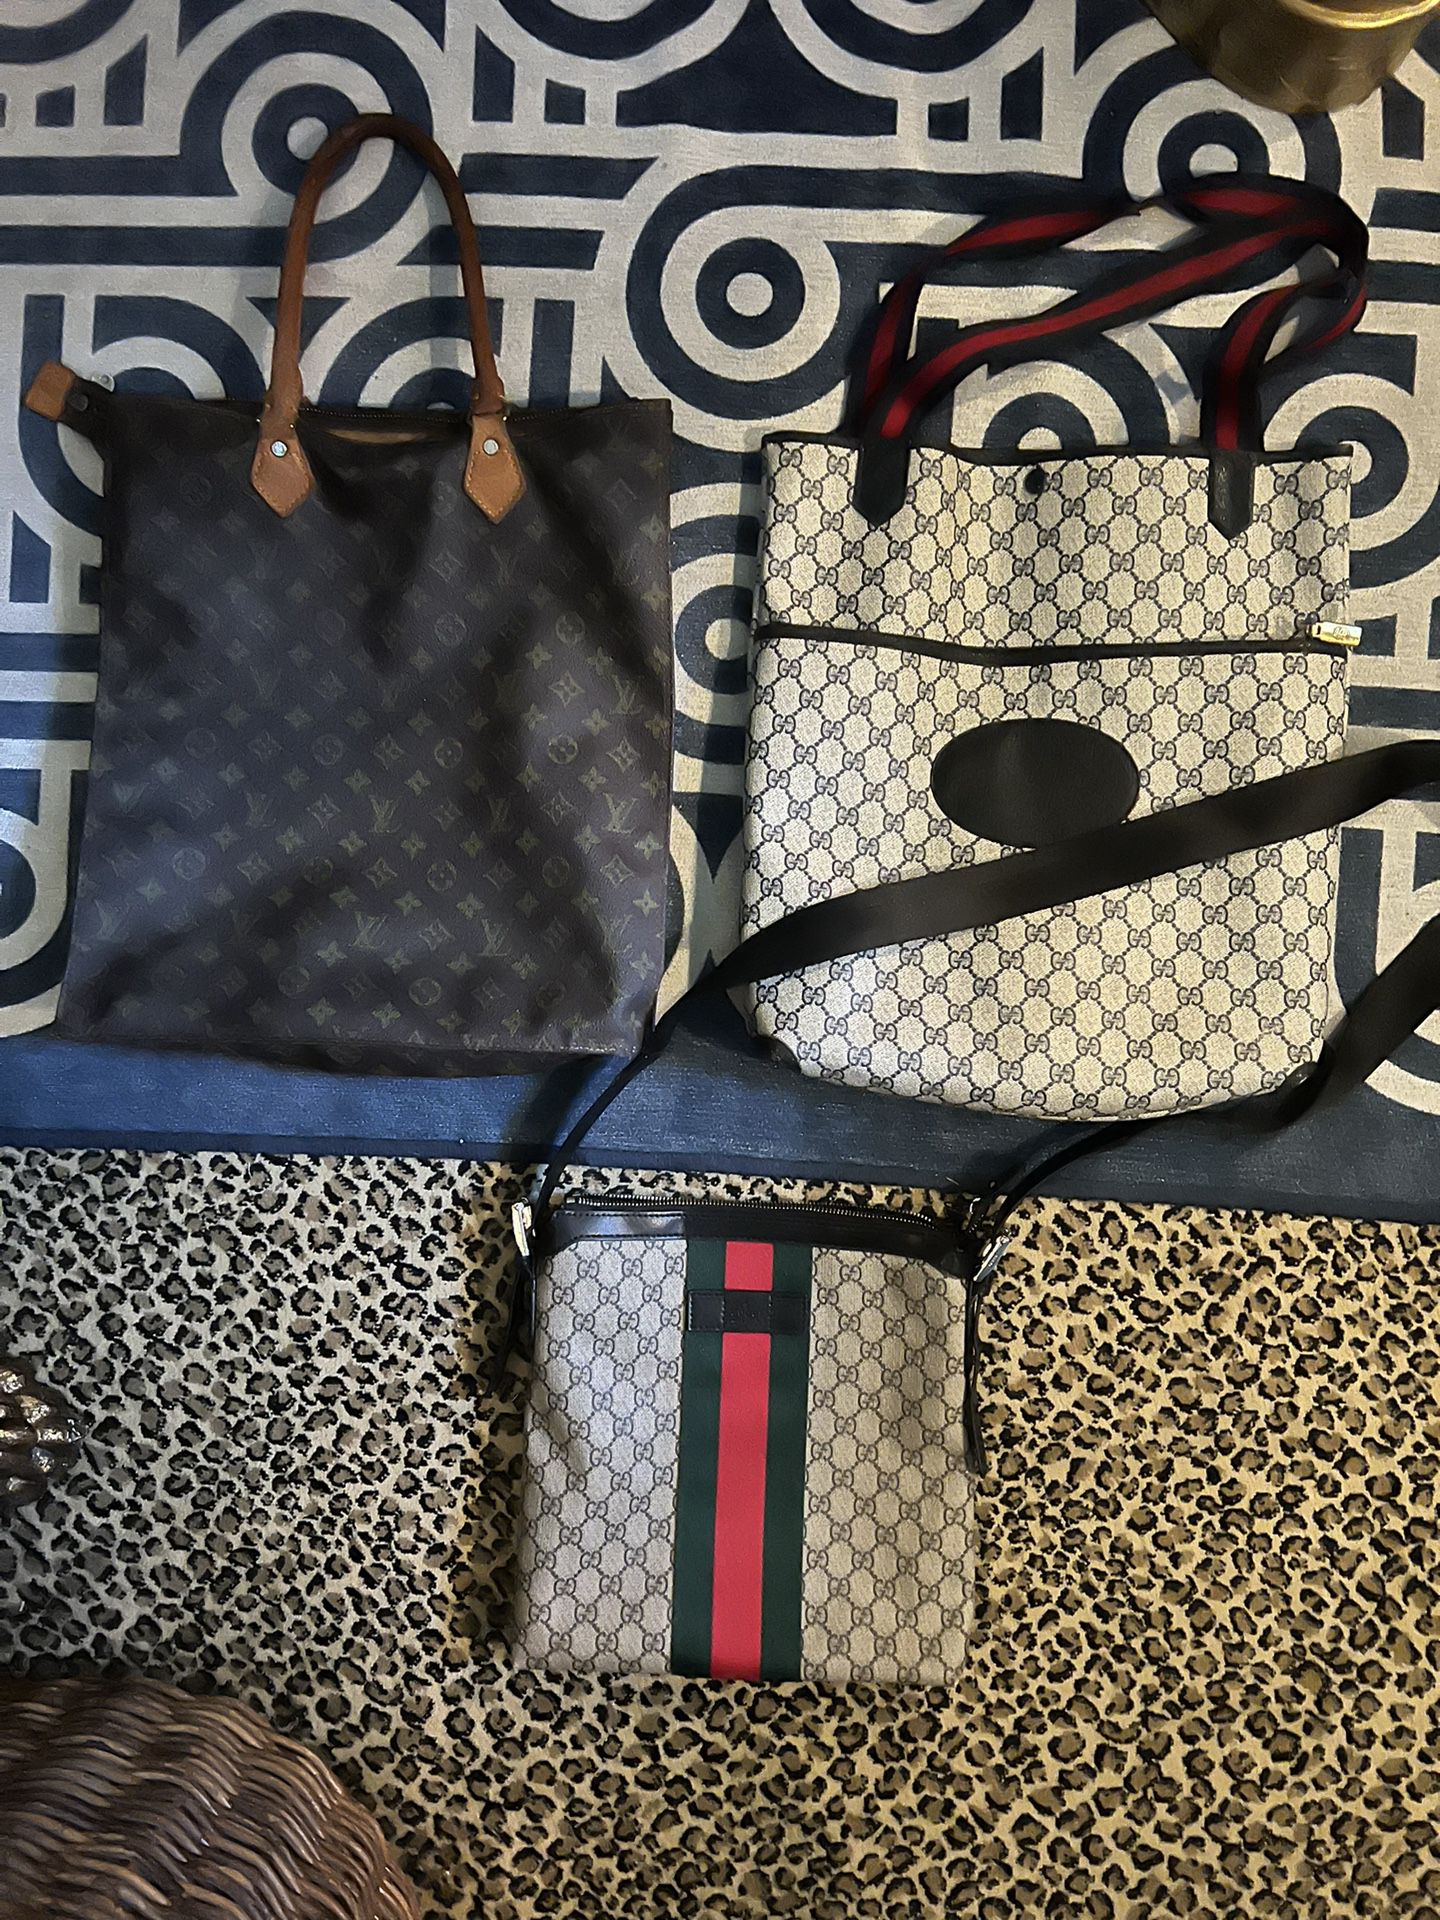 Older Totes Bags Purses